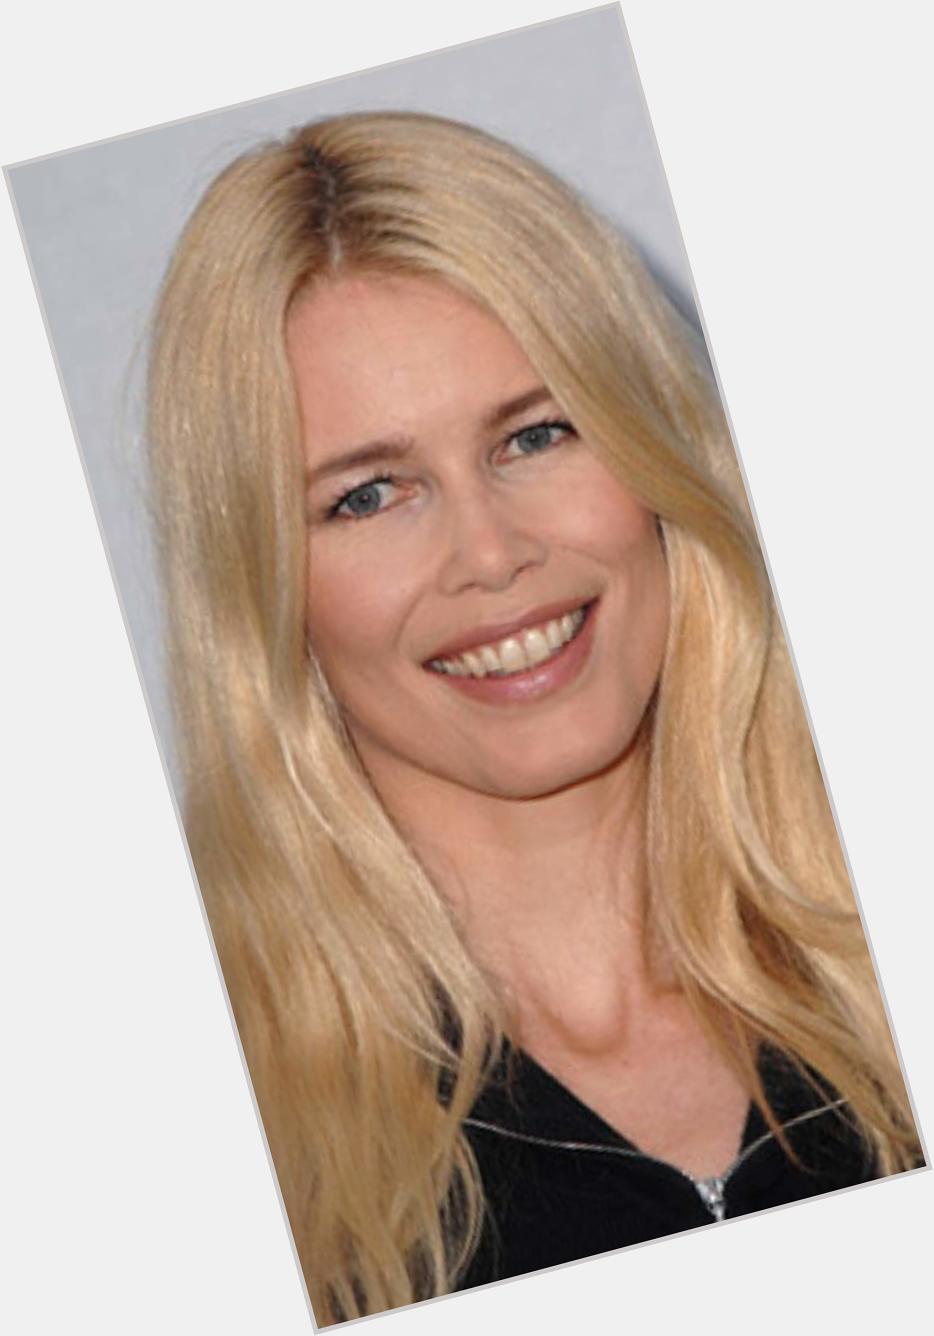 Happy Birthday to Claudia Schiffer who turns 49 today! 